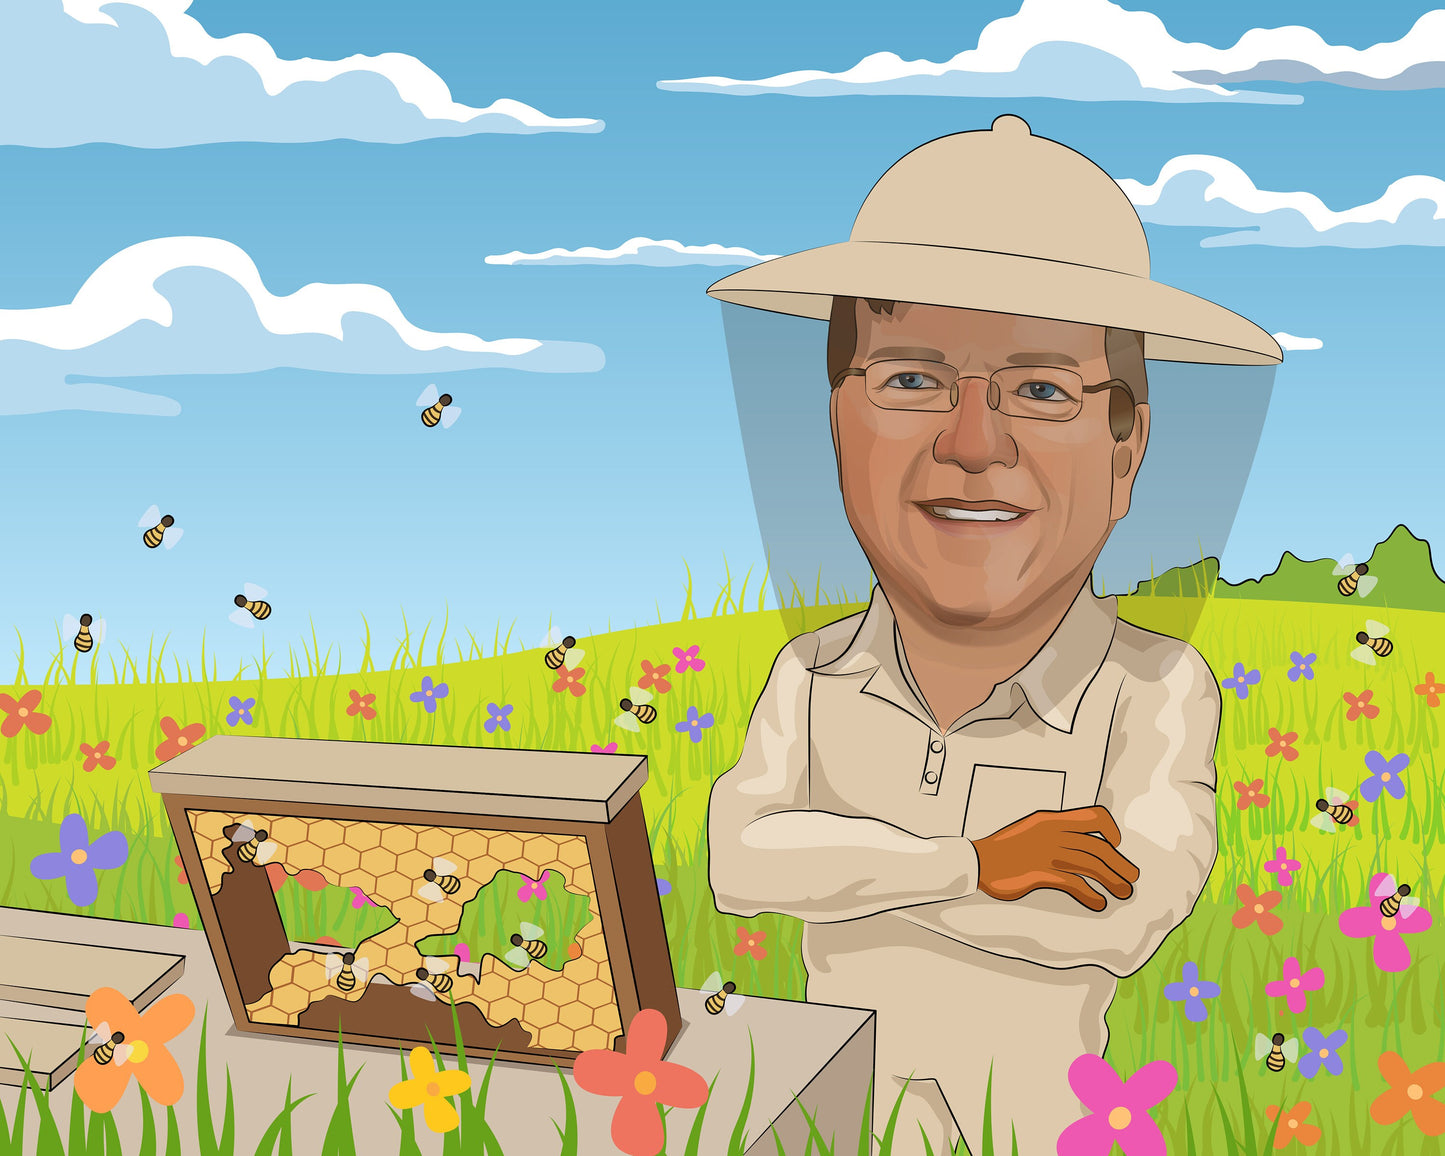 Beekeeper Gift - Custom Caricature Portrait From Your Photo/bee keeper gift/apiarist gift